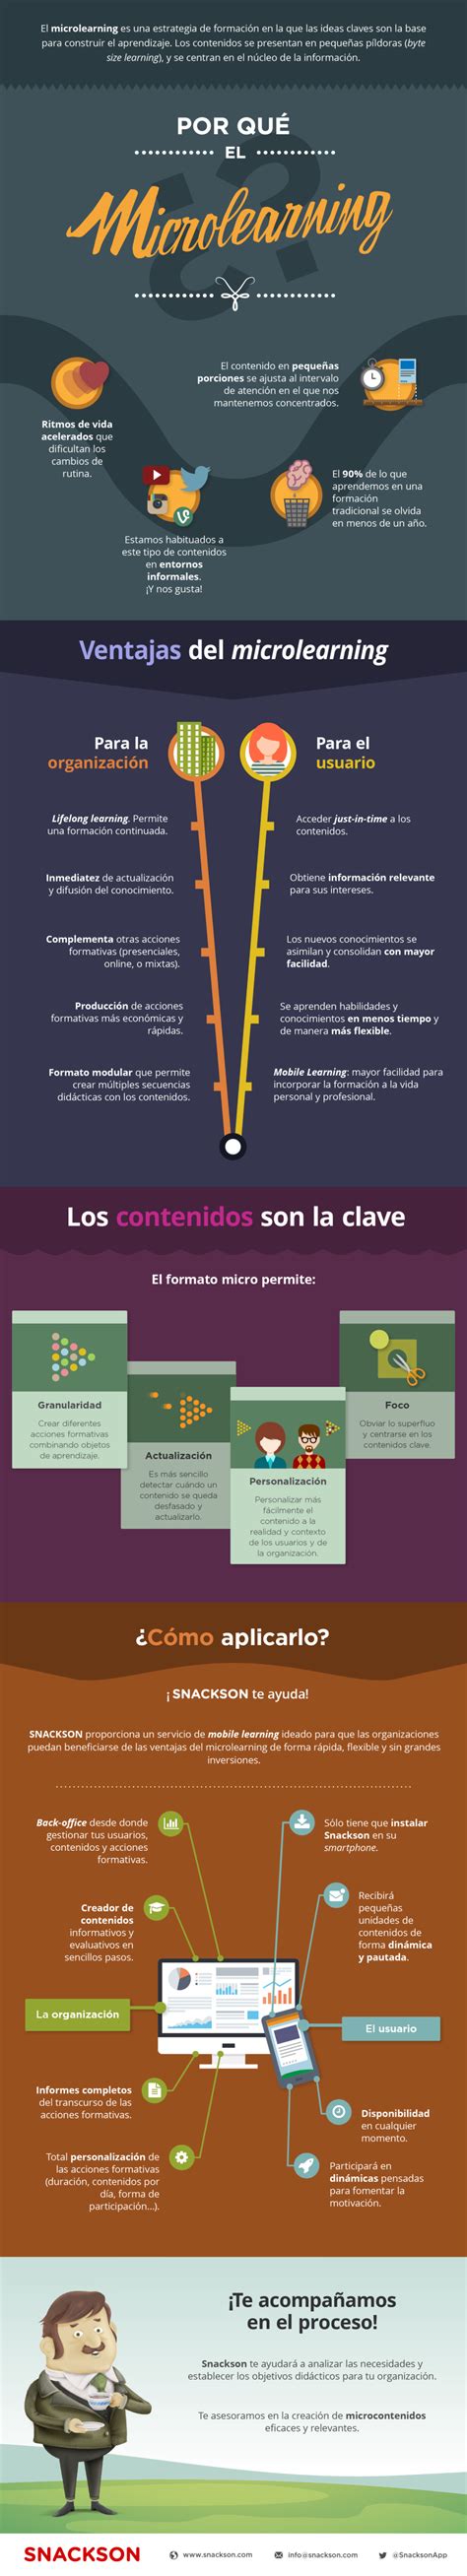 Microlearning Todo Lo Que Debes Saber Infografia Infographic